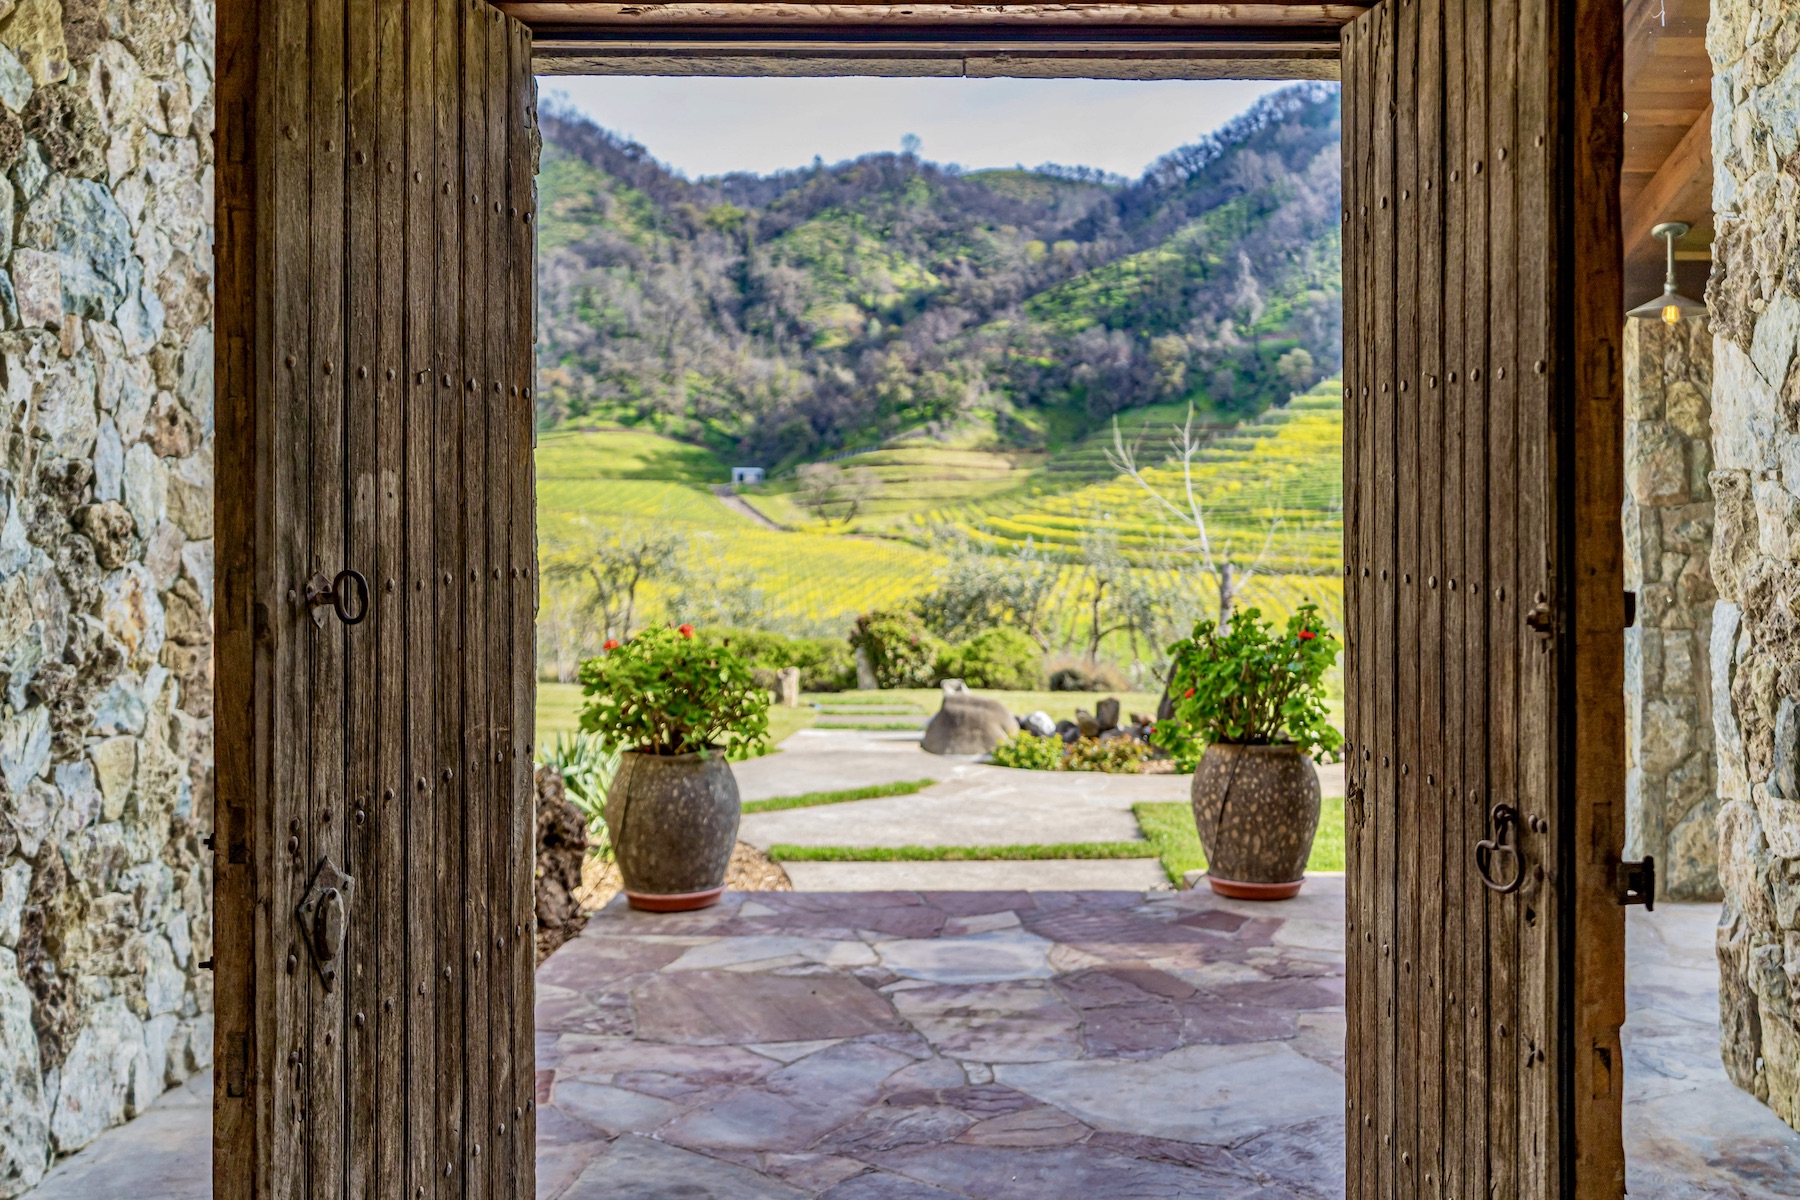 A rustic door opens onto a stone patio with rugged hills and vineyards in the distance